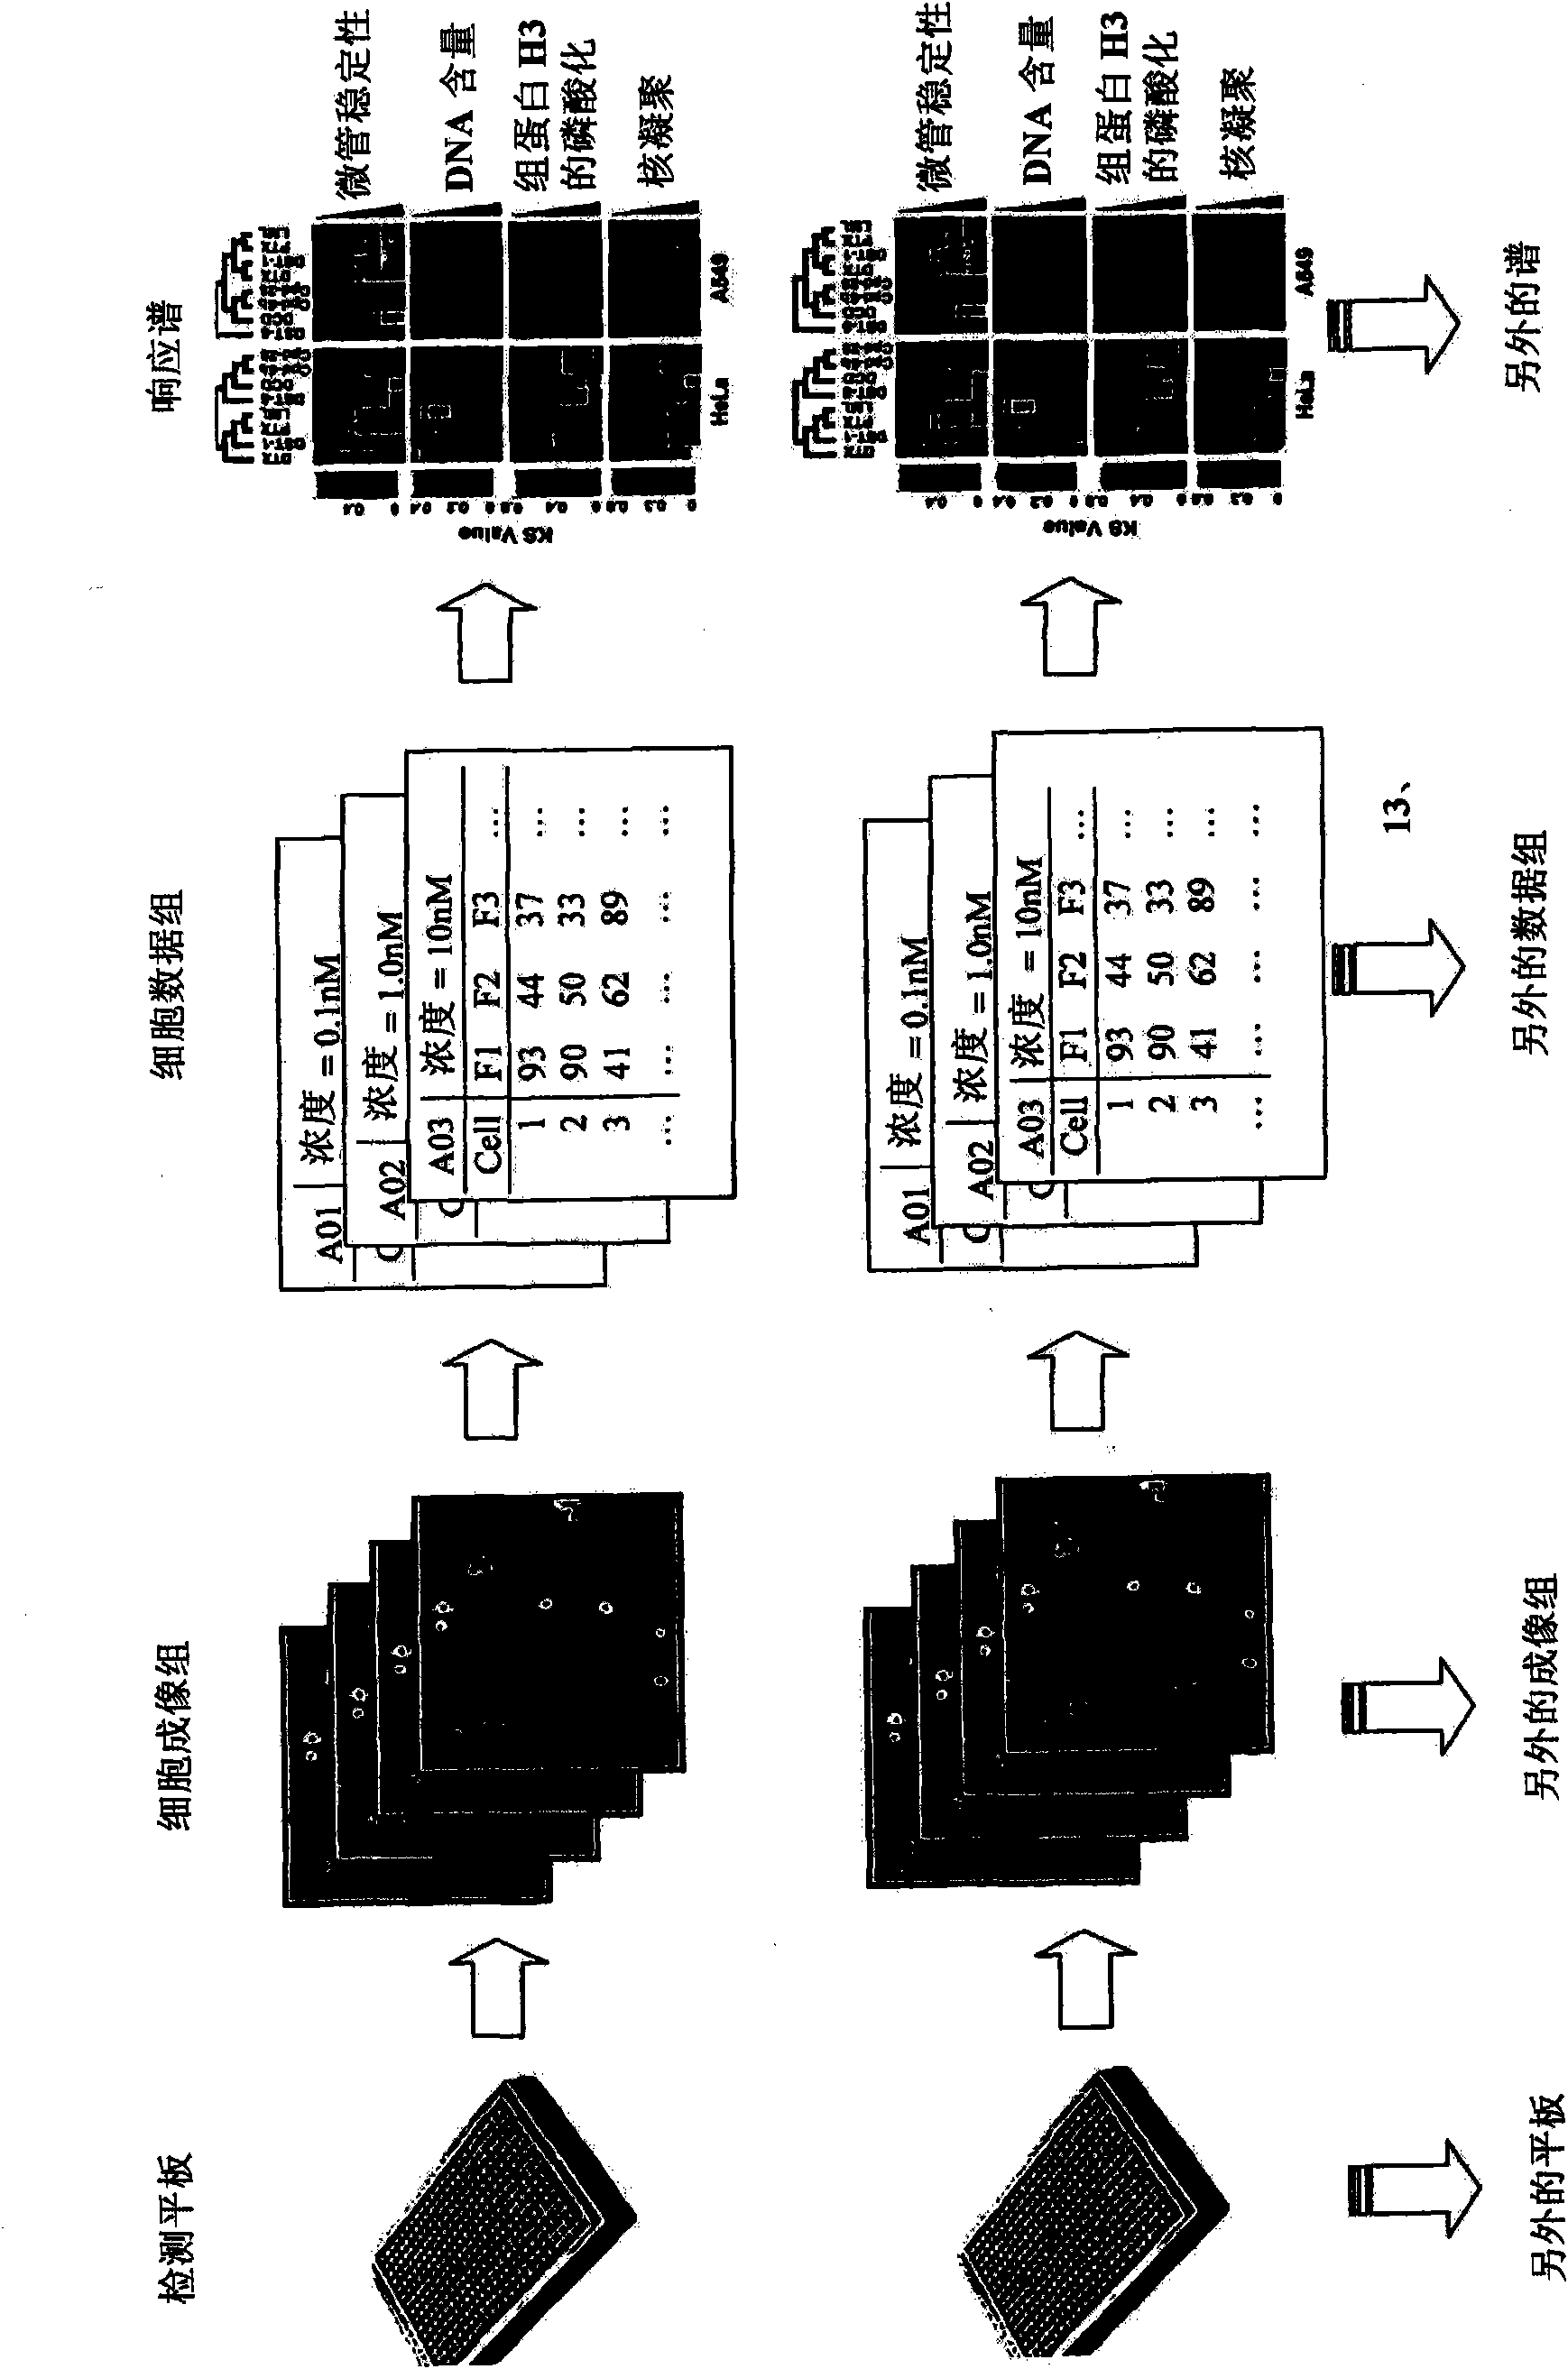 Method for predicting biological systems responses in hepatocytes